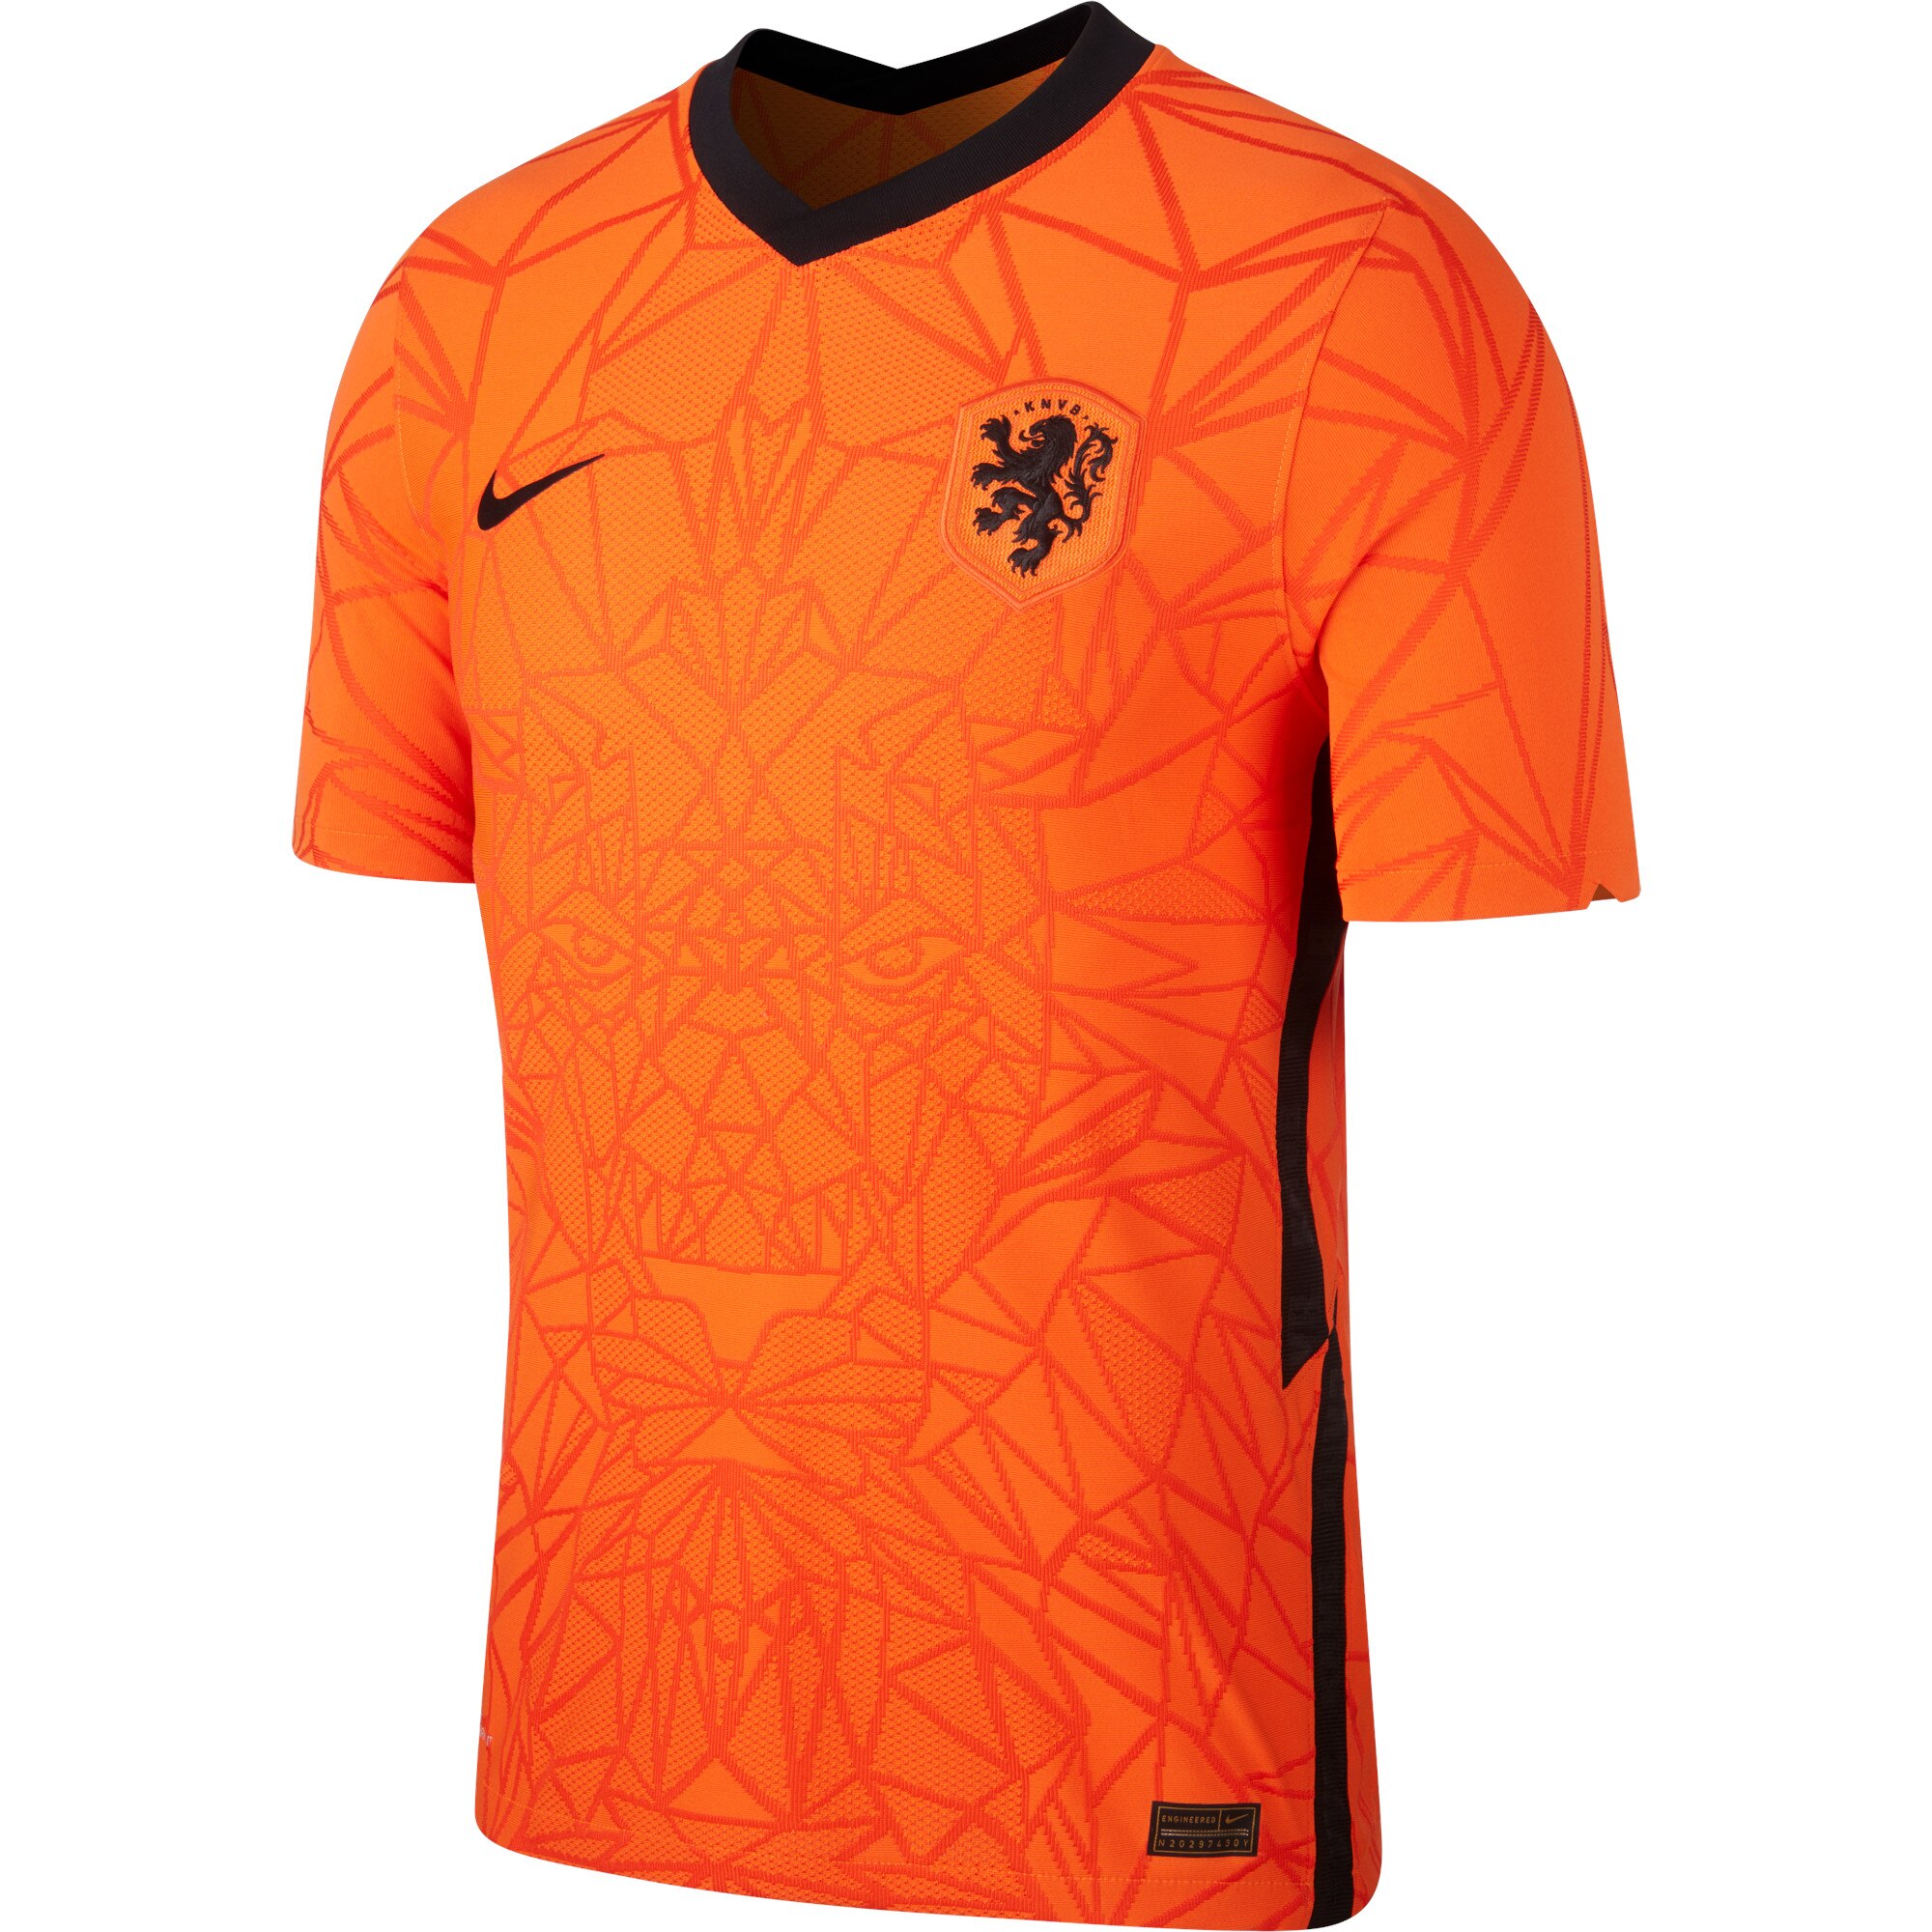 Maillot foot Pays-Bas Domicile Euro 2020-2021